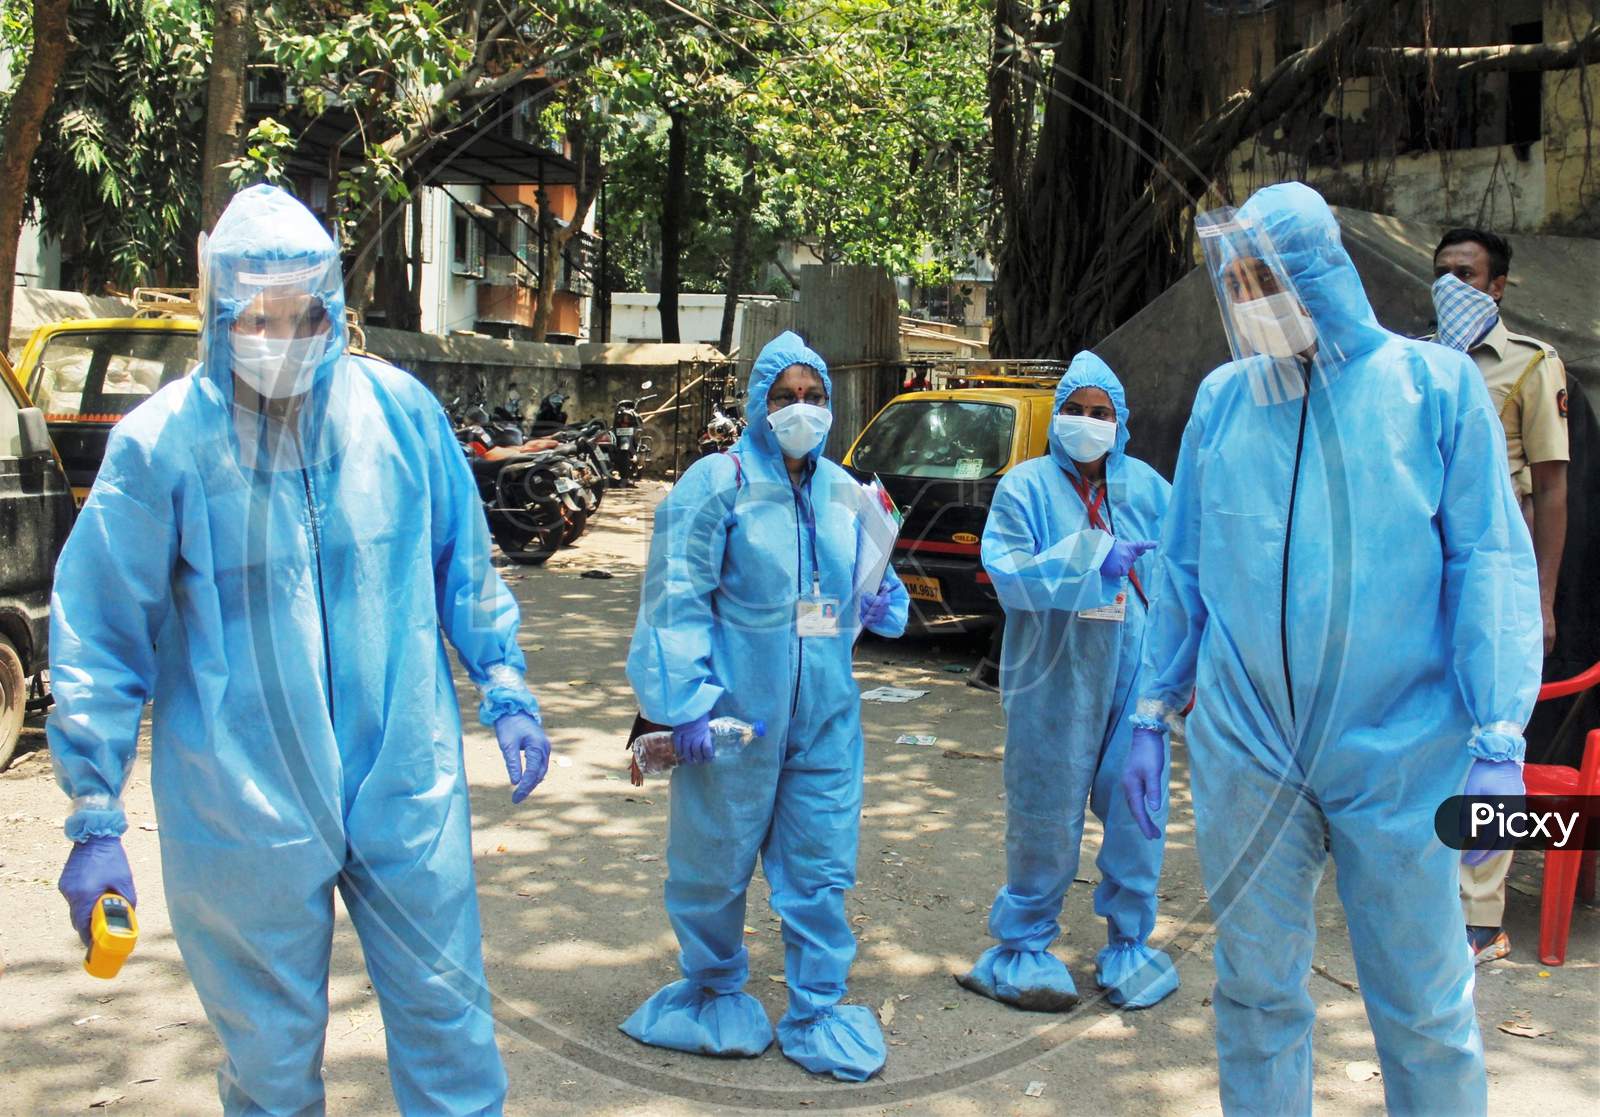 Doctors wearing protective suits arrive at spot to scan the residents of  Dharavi, one of Asia's largest slums, with an infrared thermometer to check their temperature as a precautionary measure against the spread of the coronavirus disease (COVID-19), in Mumbai, India, April 12, 2020.